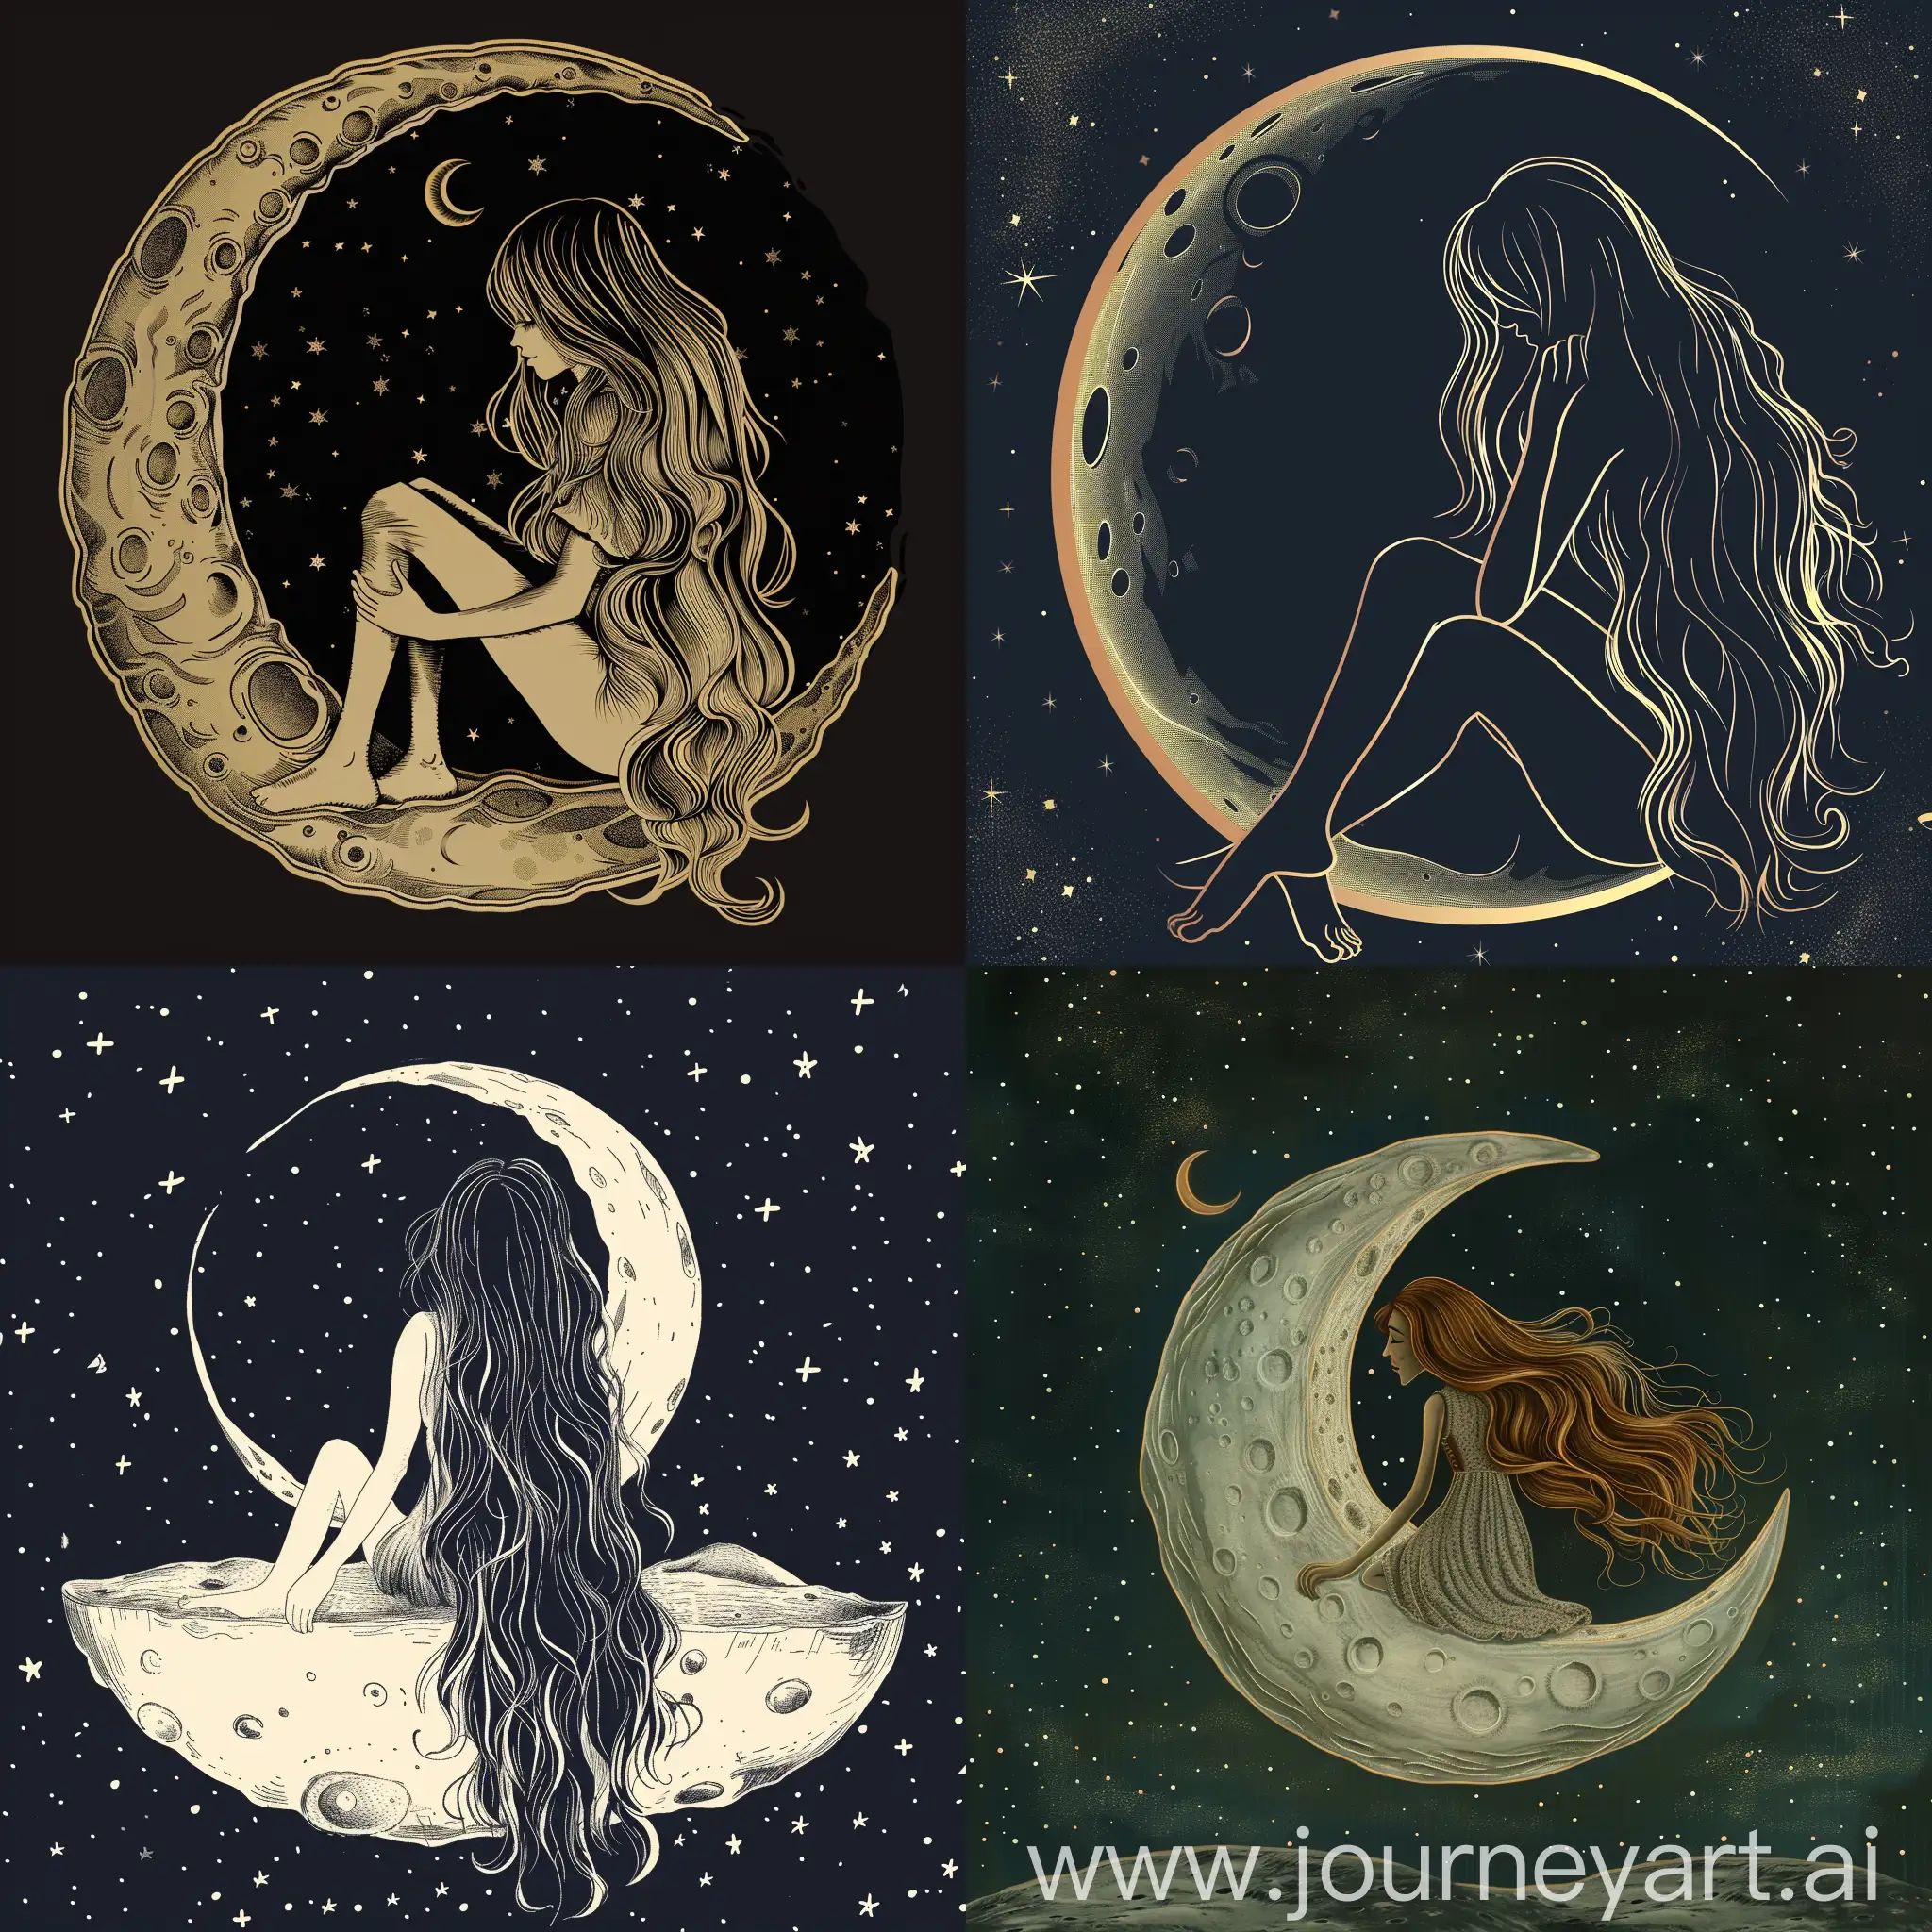 Dreamy-Girl-with-Long-Wavy-Hair-Sitting-on-the-Moon